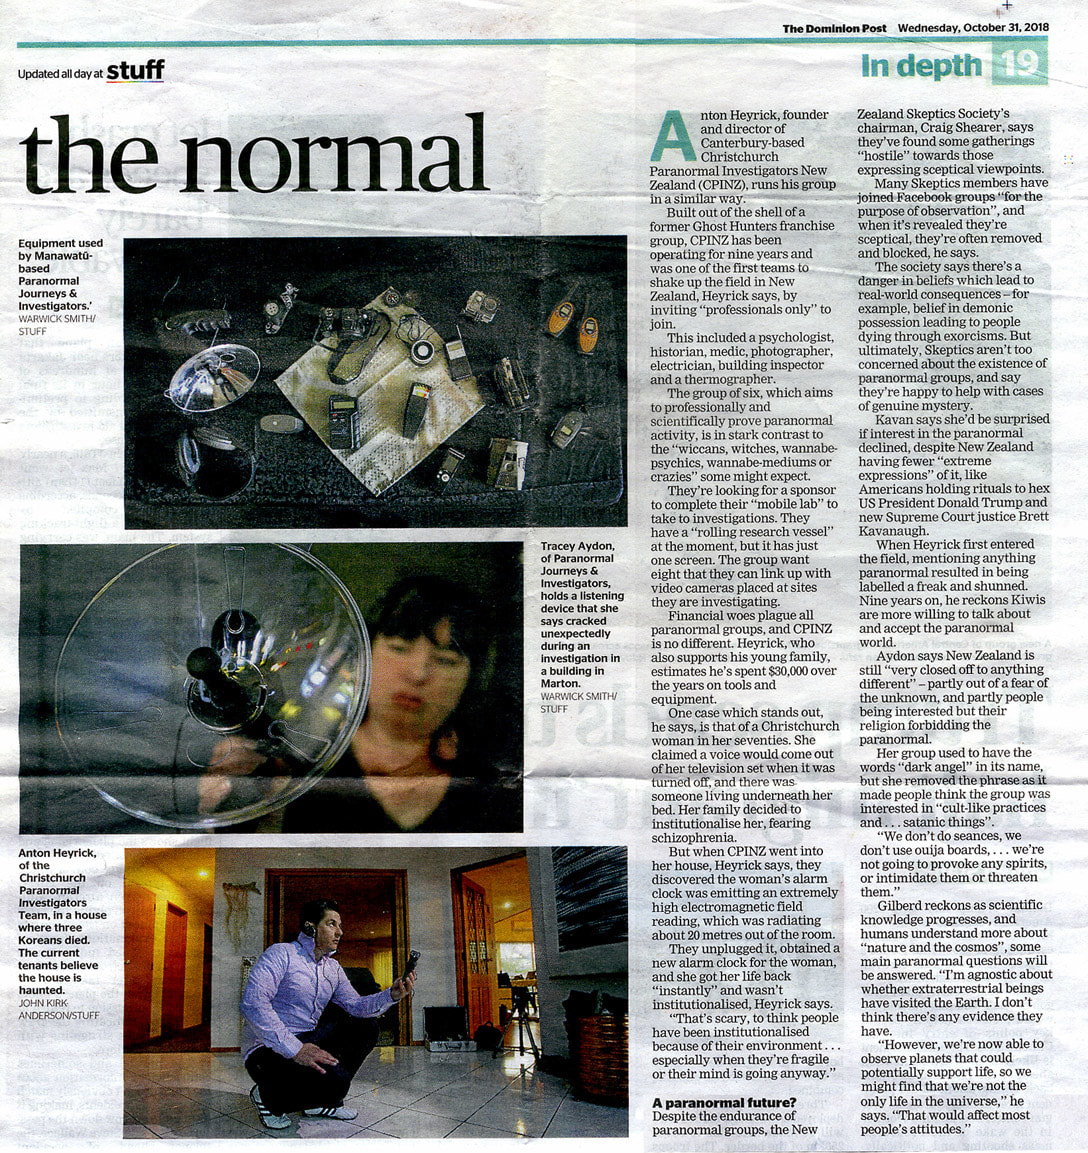 'Turning the paranormal into the normal' - Dominion Post article on the NZ paranormal scene, 31 October 2018, Andre Chumsky, New Zealand Strange Occurrences Society